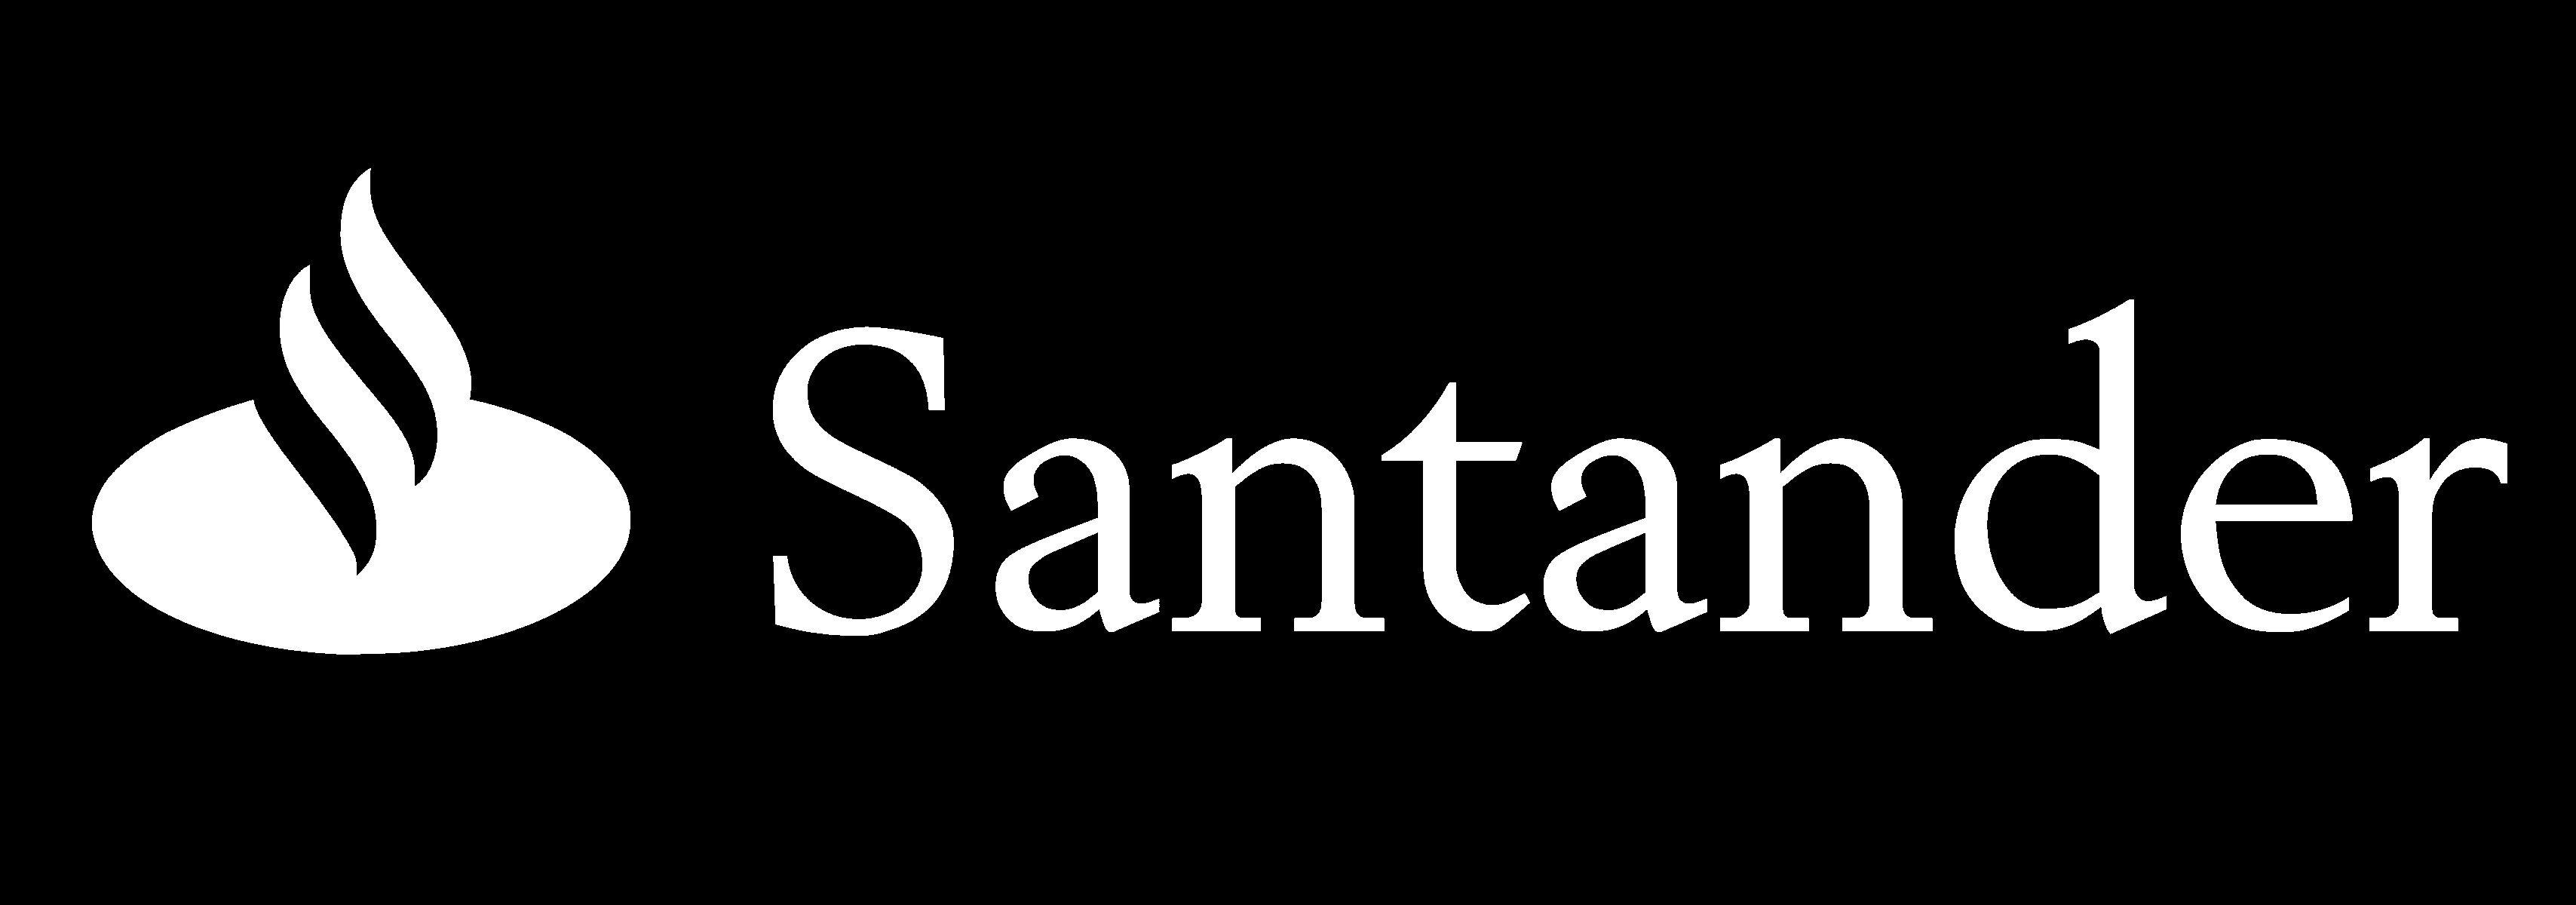 Santander Bank Logo - Santander Logo, Santander Symbol, Meaning, History and Evolution